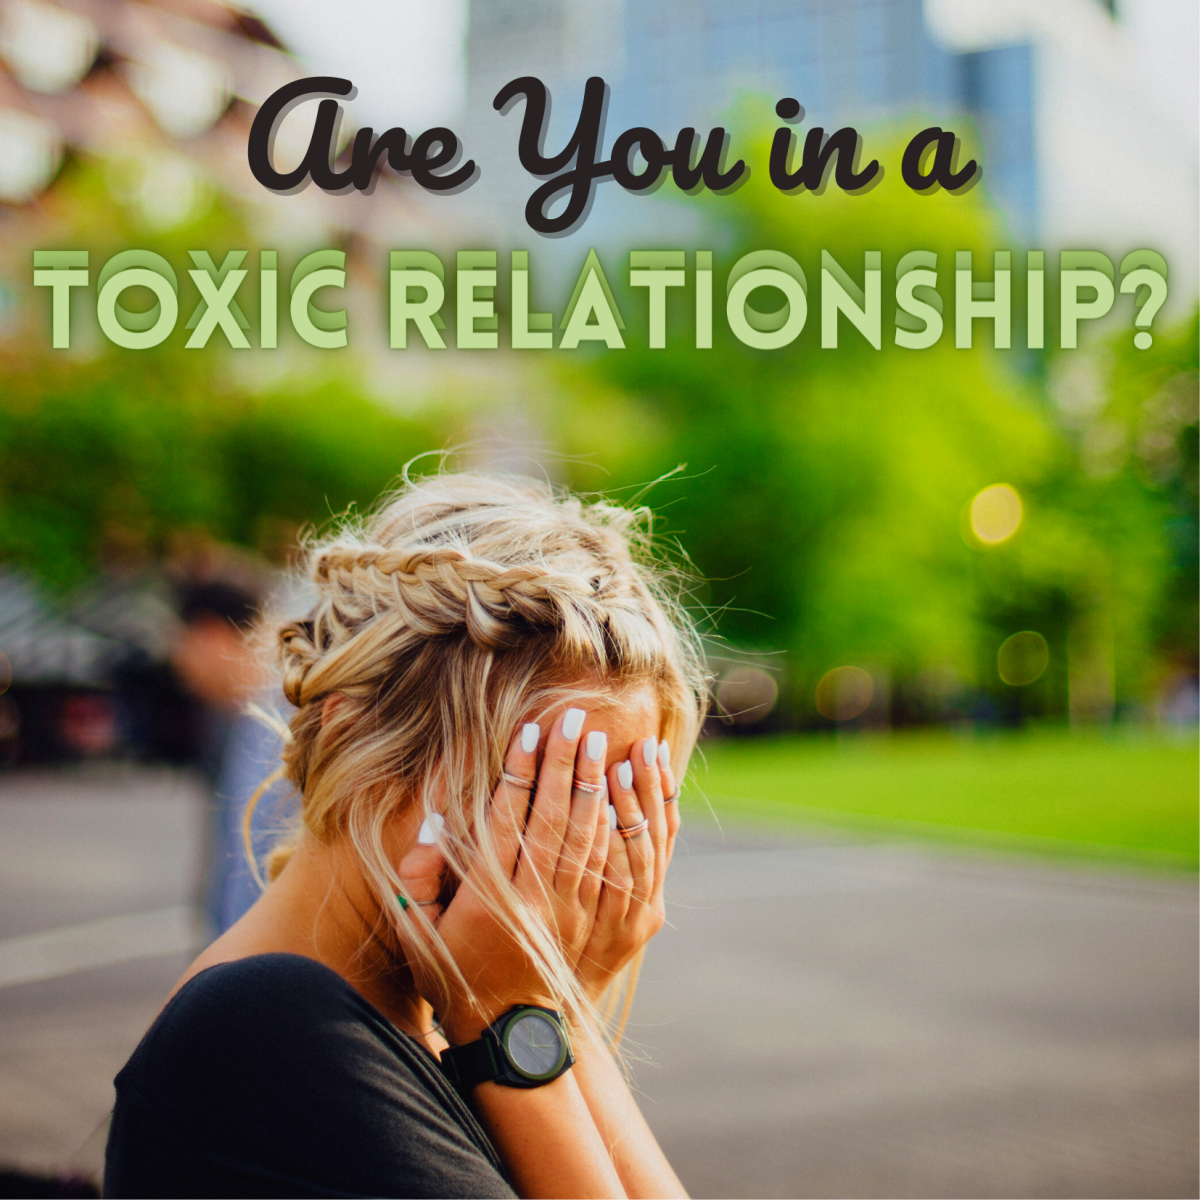 10 Behavioral Signs of a Toxic Relationship